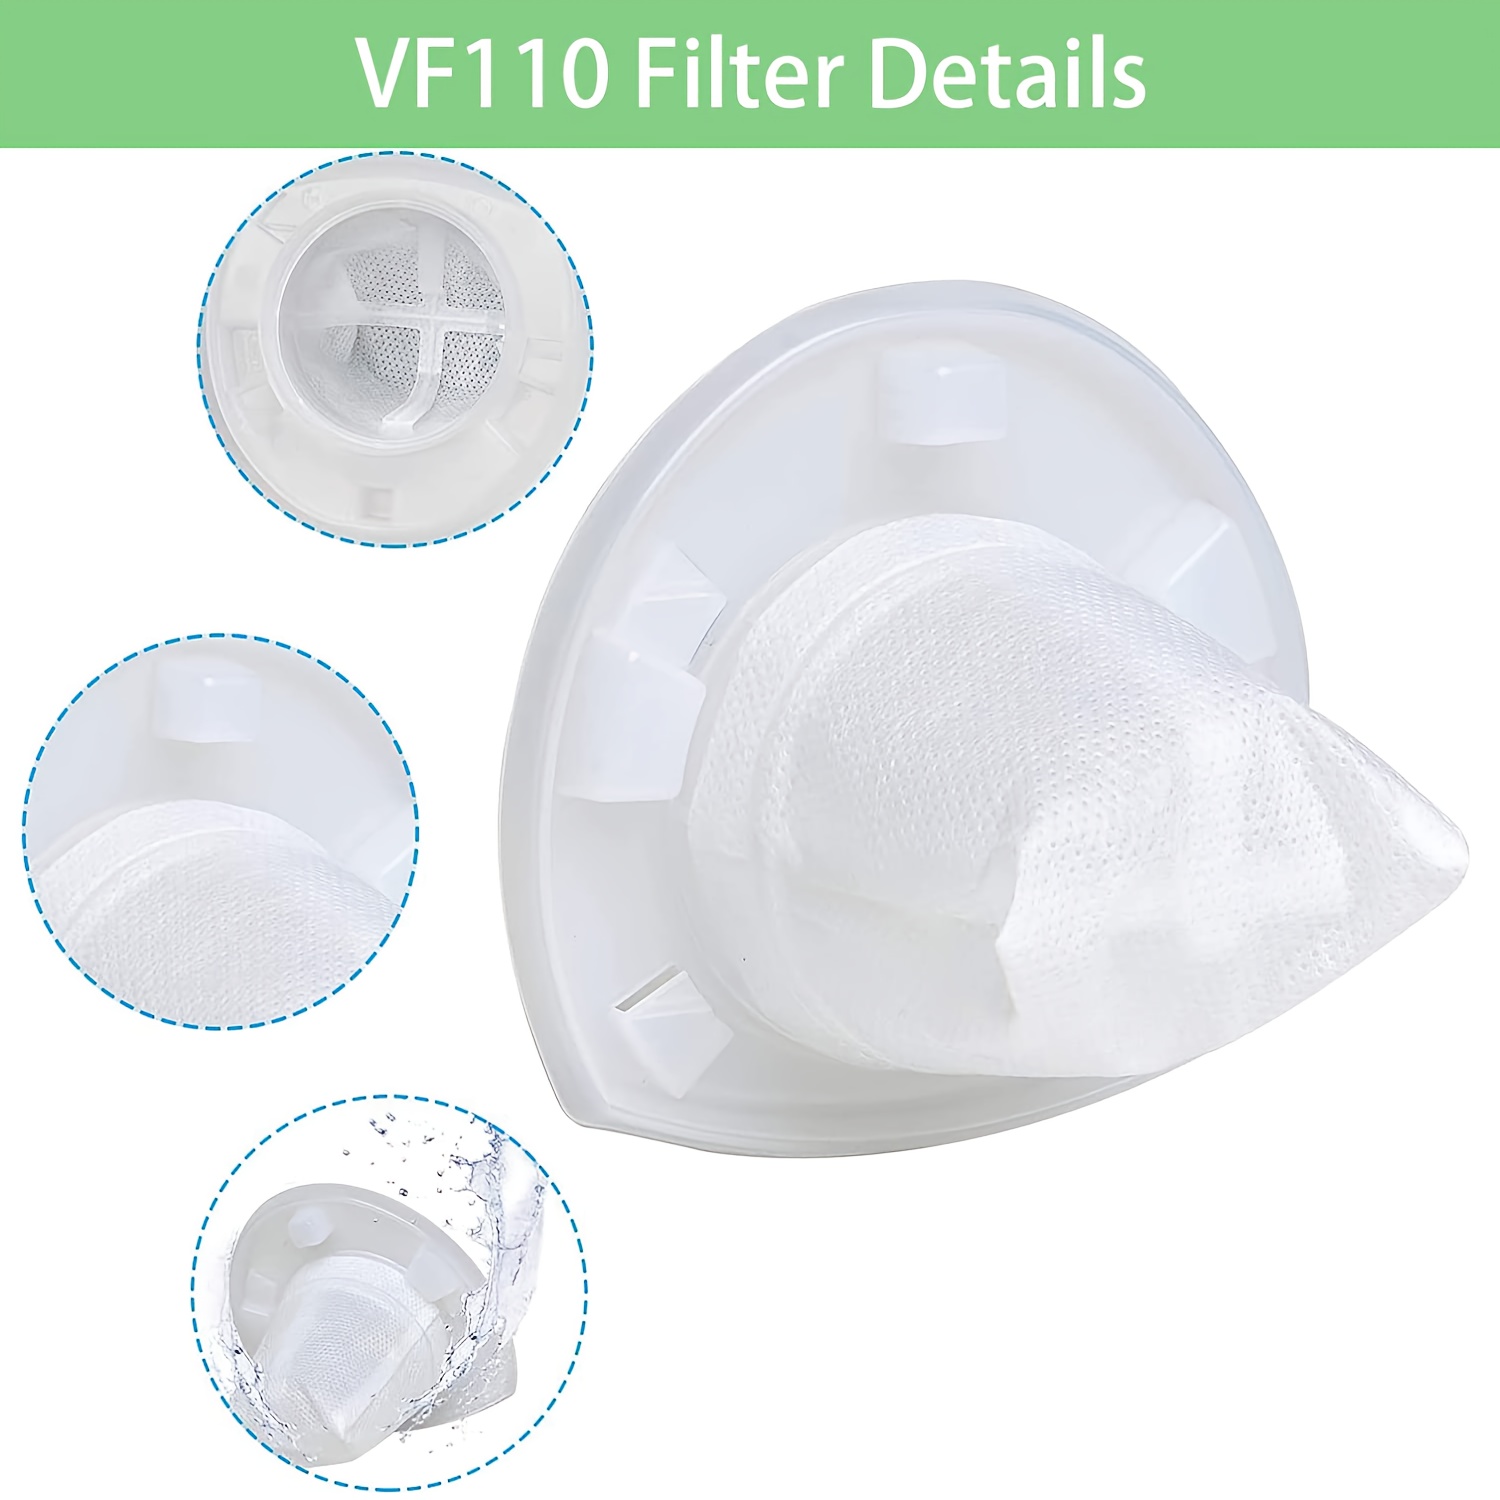 Black & Decker Power Tools VF110 Dustbuster Replacement Filter, pack of 5